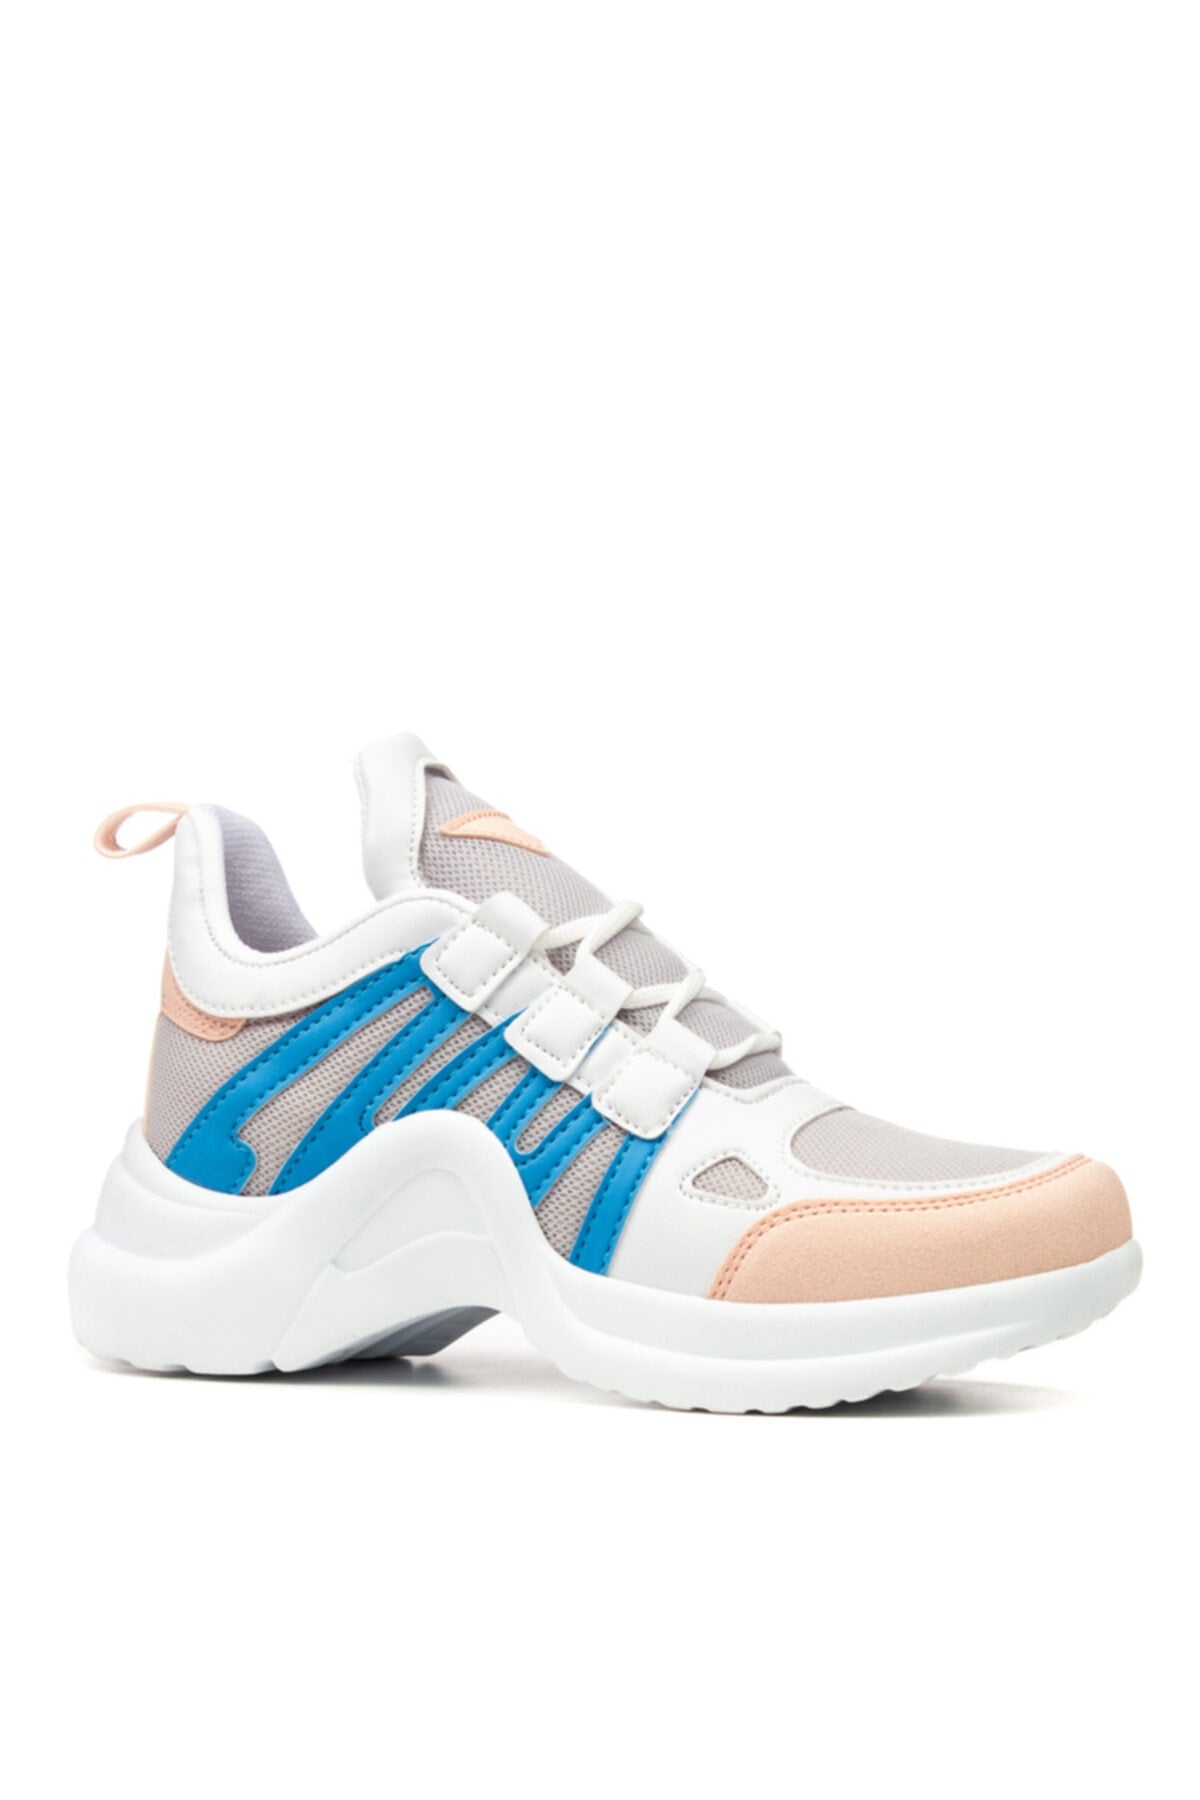 Women's daily sneakers